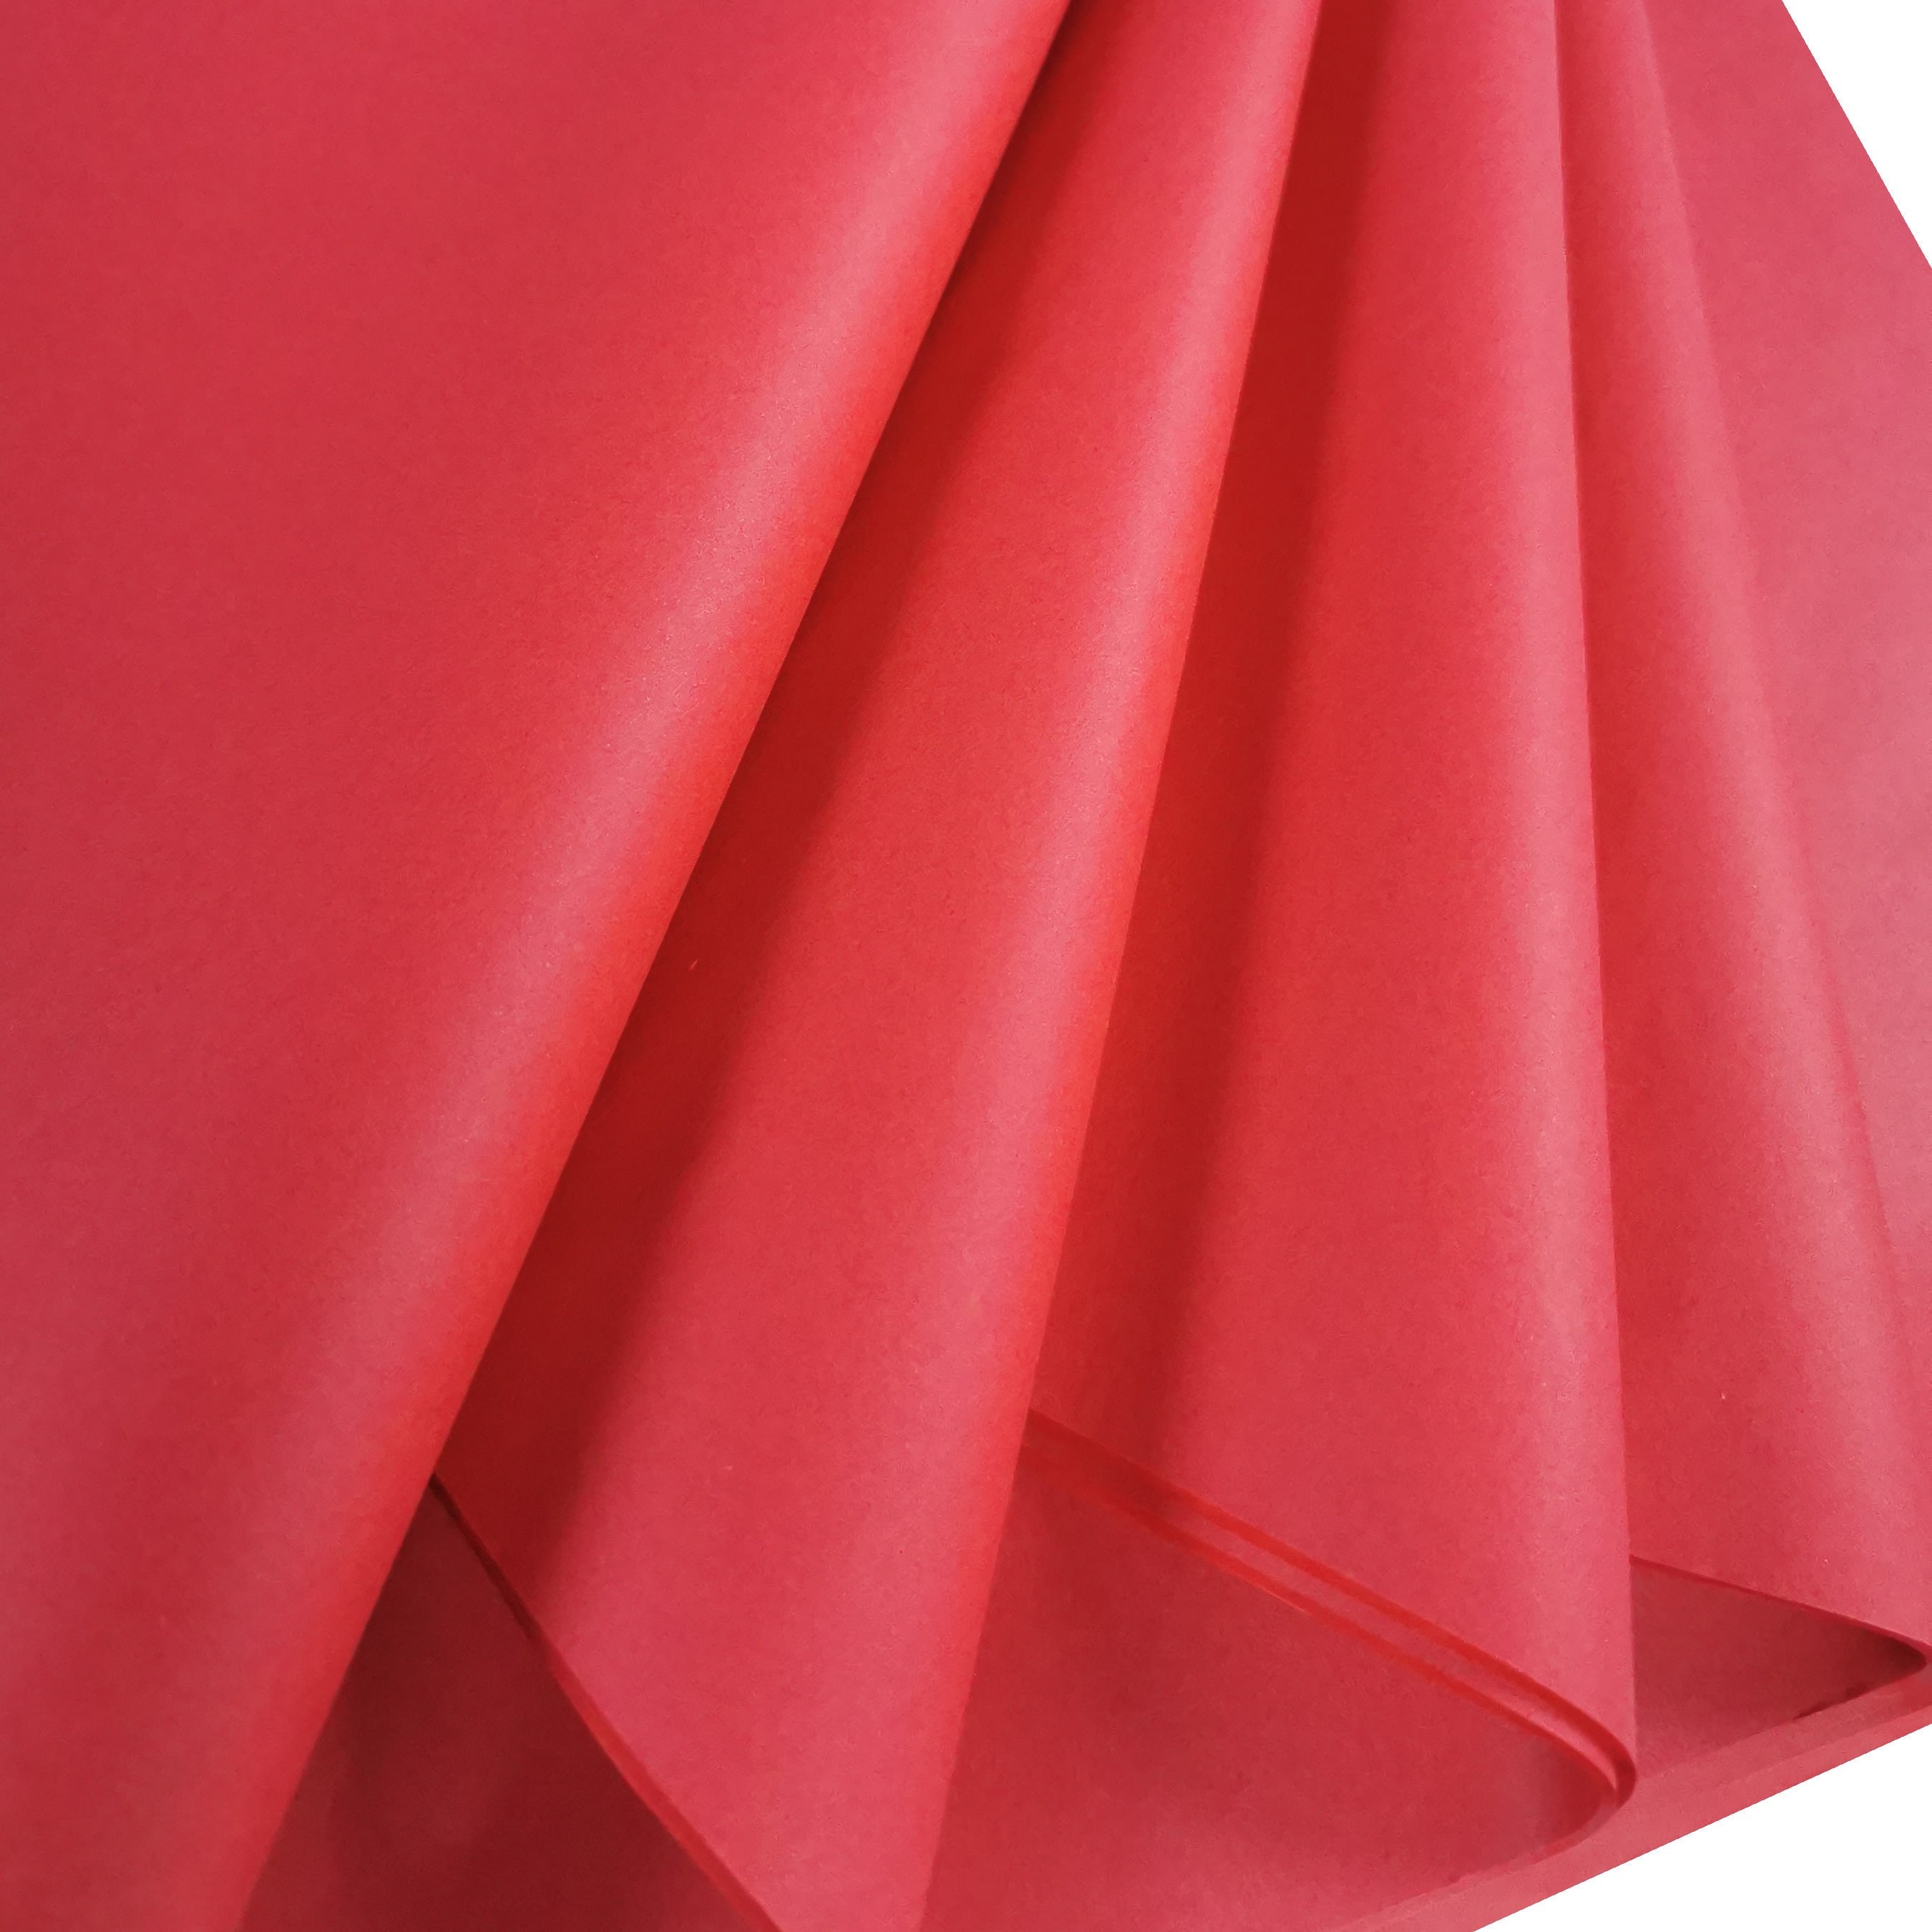 Extra Large Pink Crepe Paper Sheets For Flower Crafting & Gift Wrapping  50cmx300cm